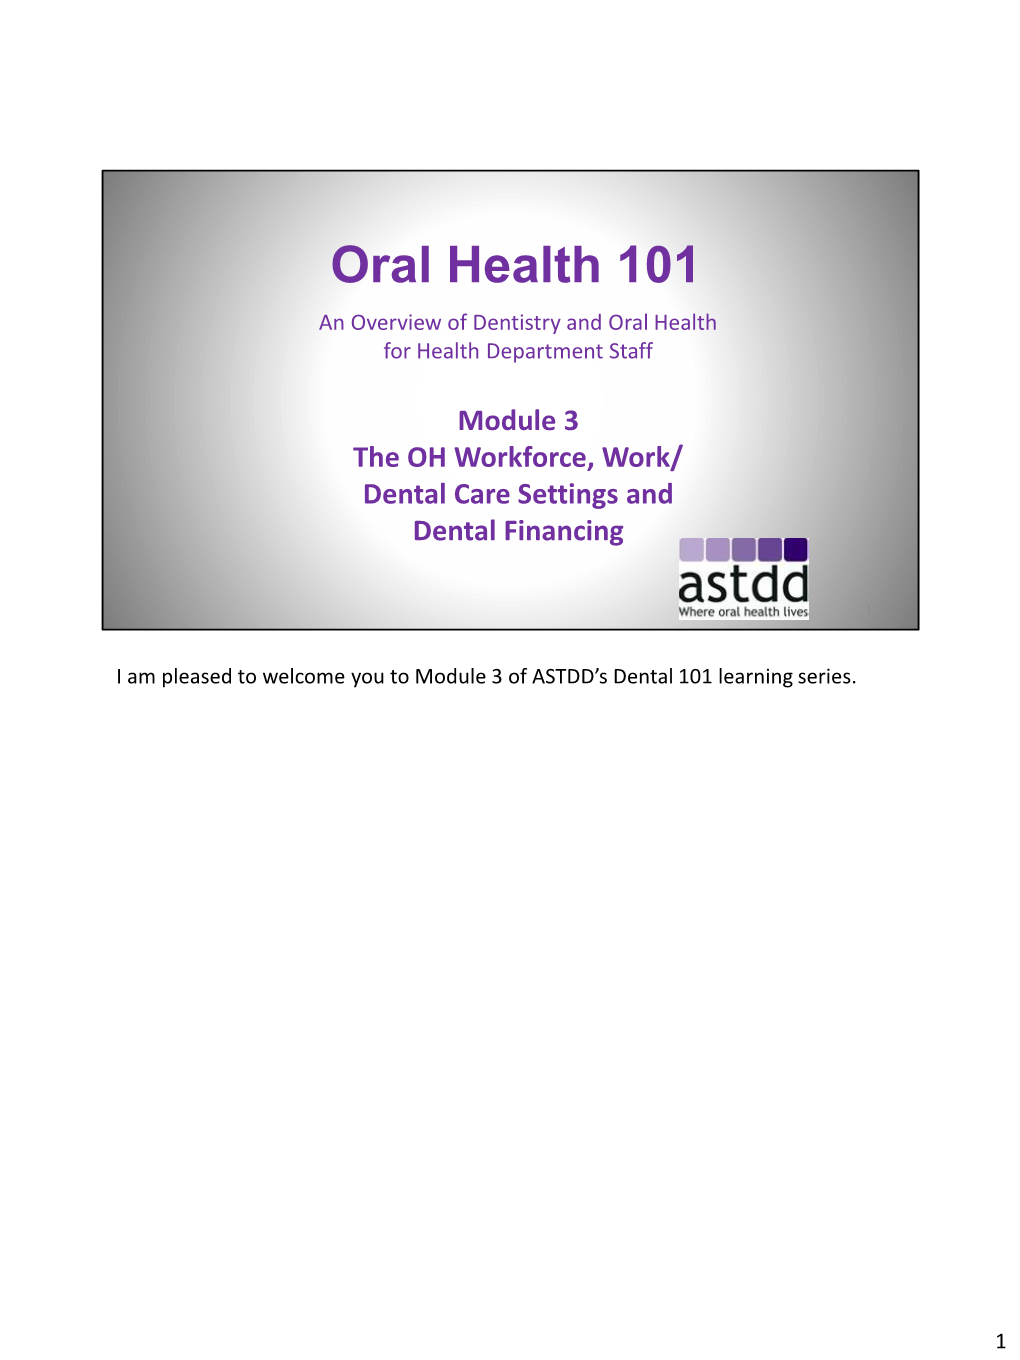 Oral Health 101 an Overview of Dentistry and Oral Health for Health Department Staff